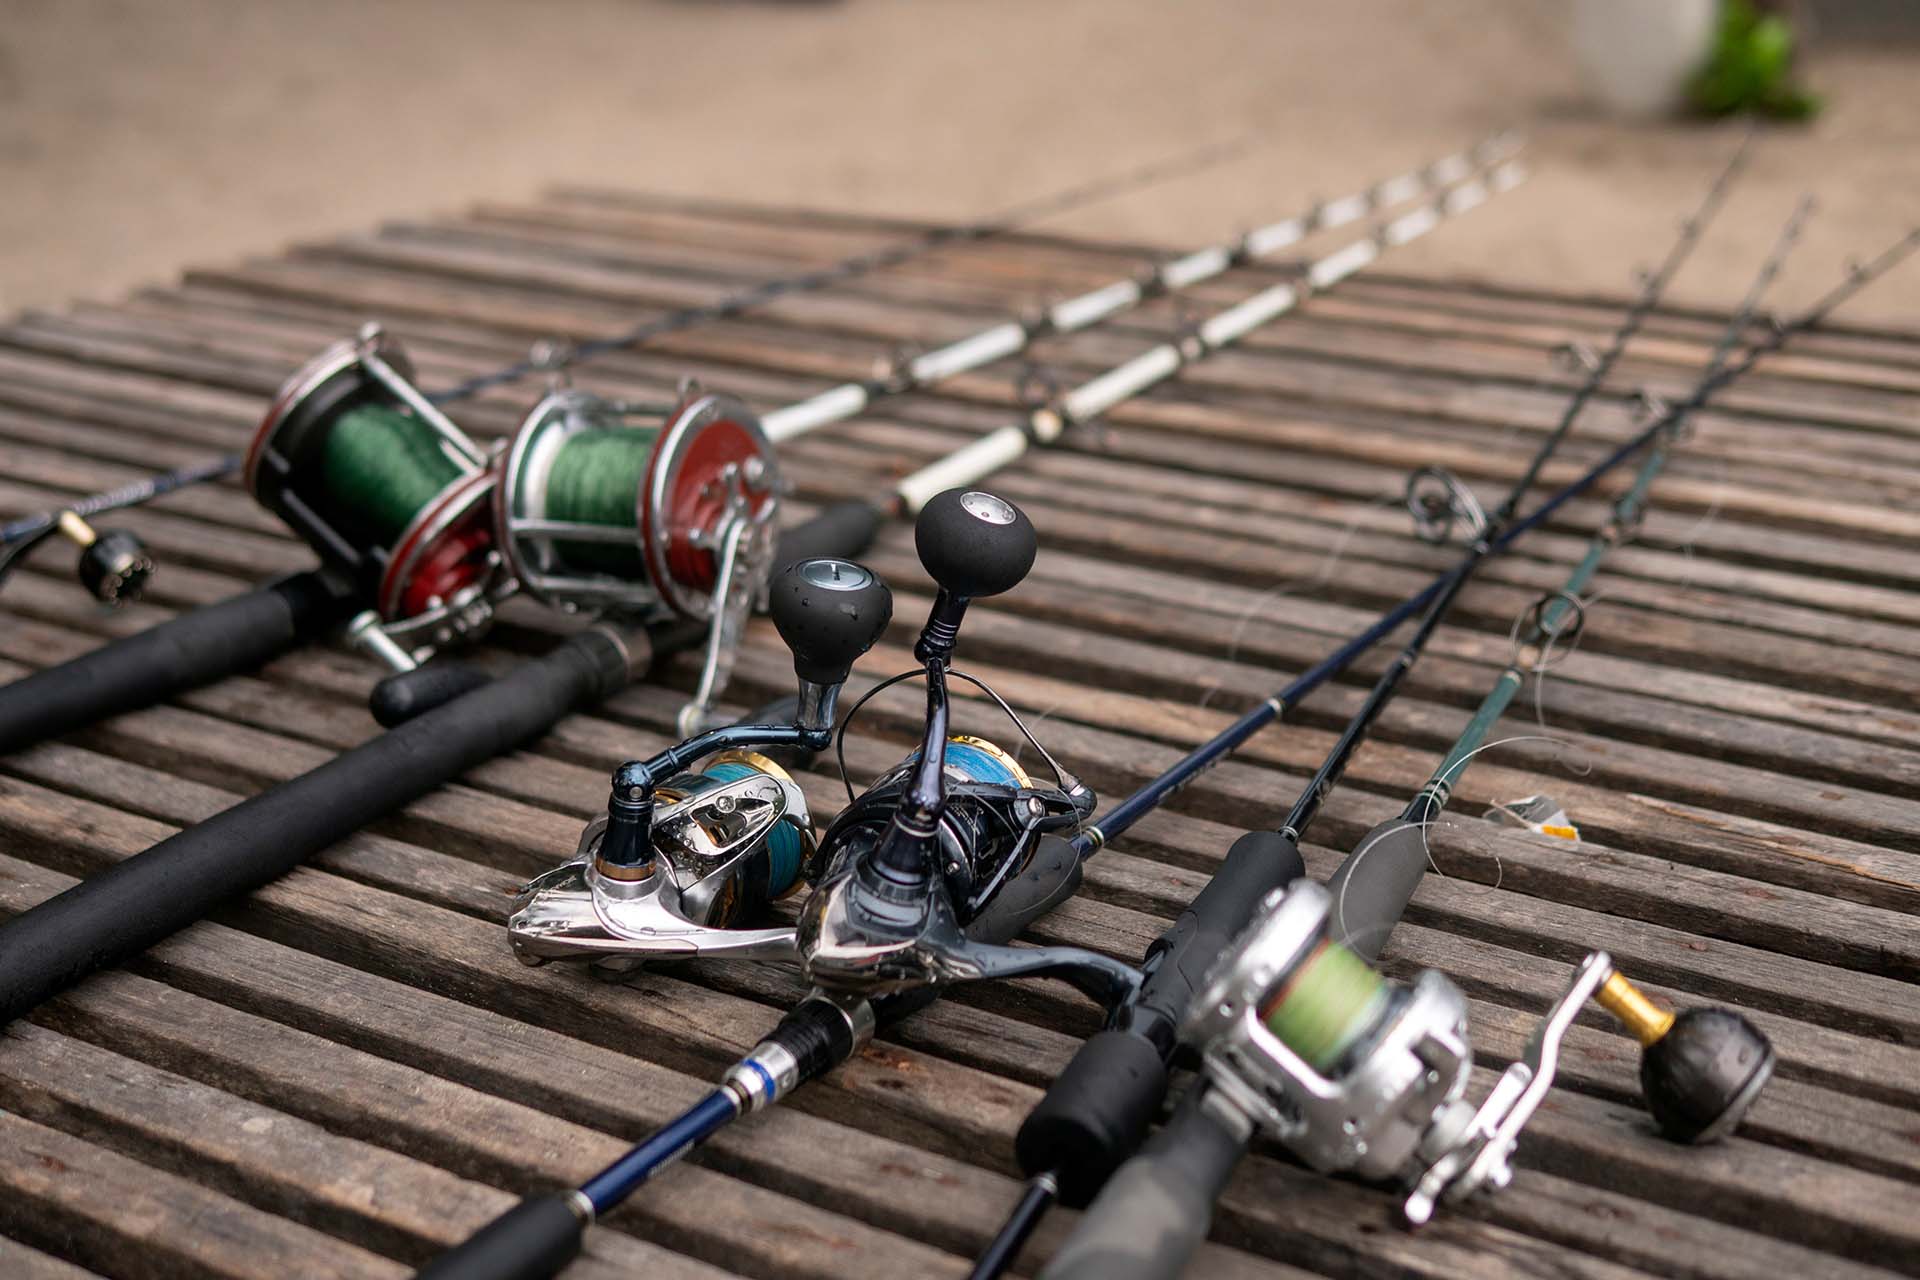 Fishing rods, reels, and lines on a wooden background